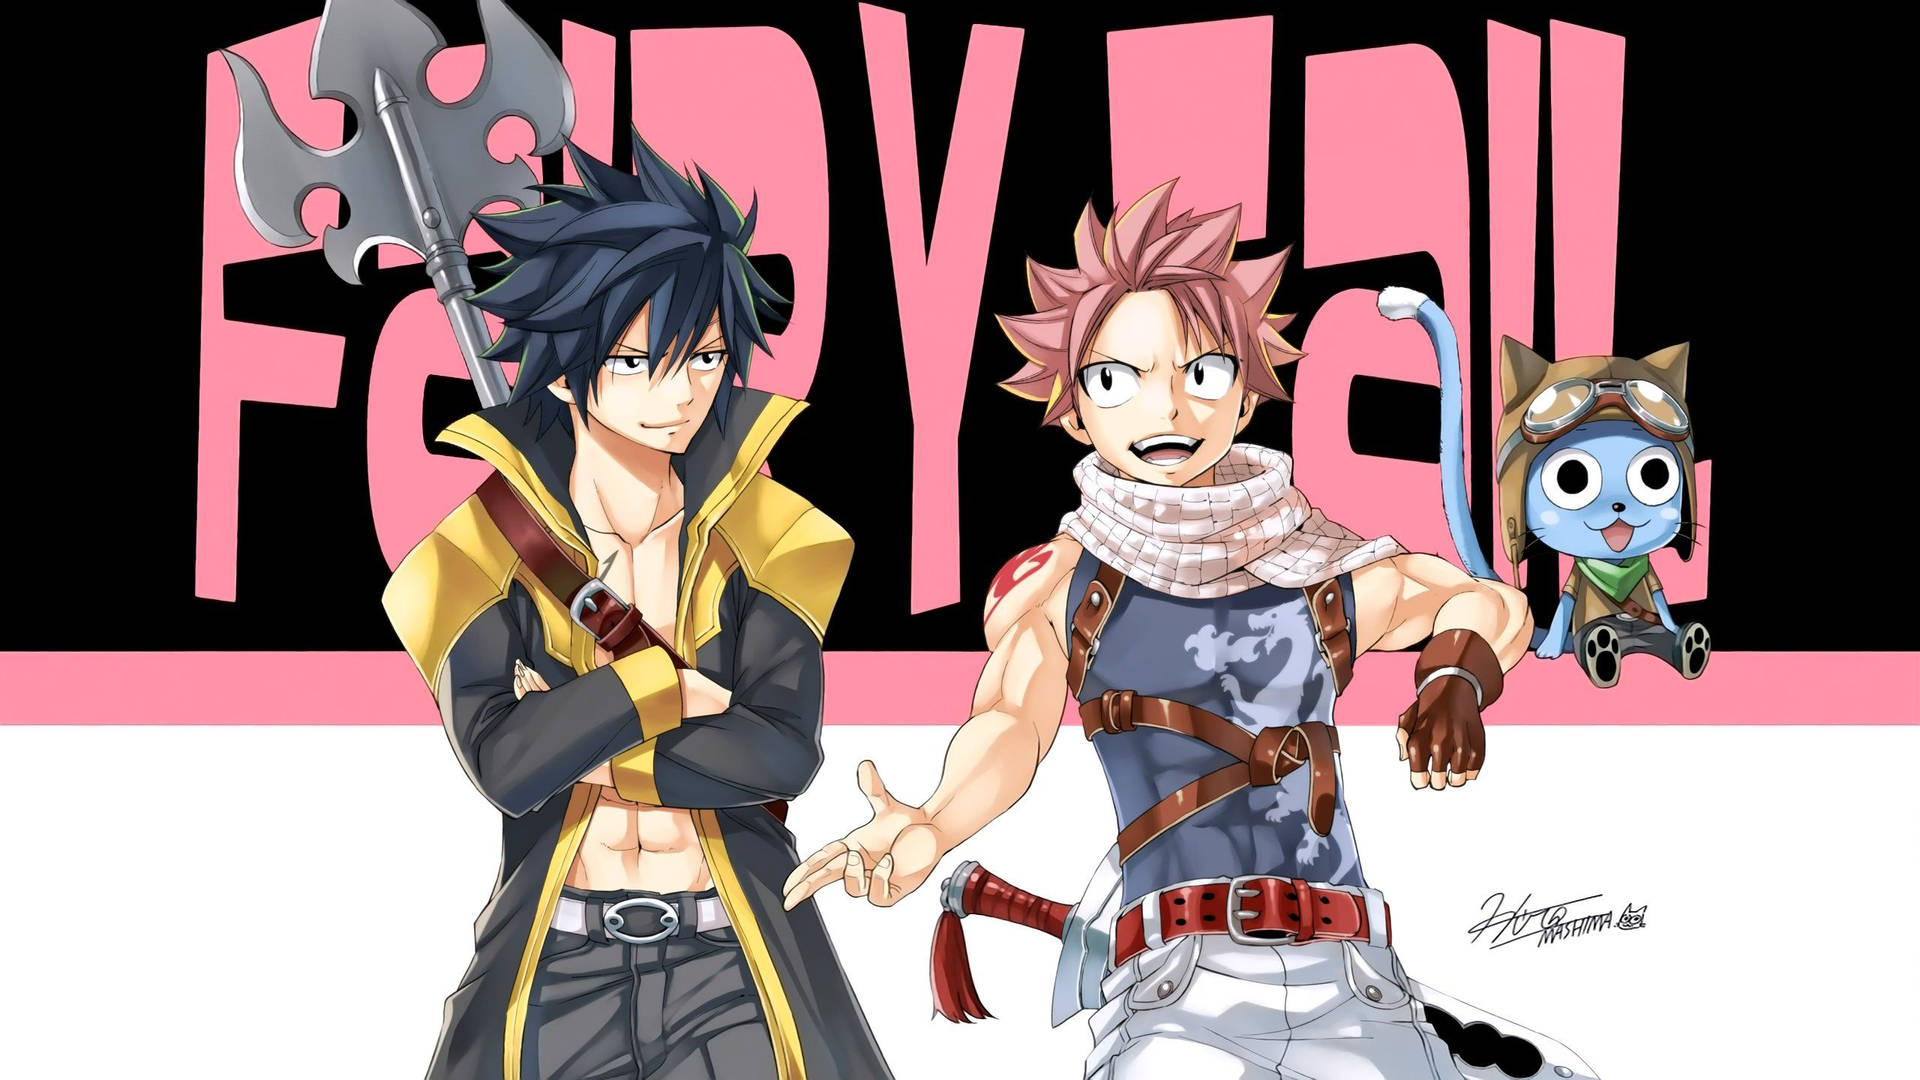 Natsu and Gray, two of the main characters in the Fairy Tail anime. Wallpaper